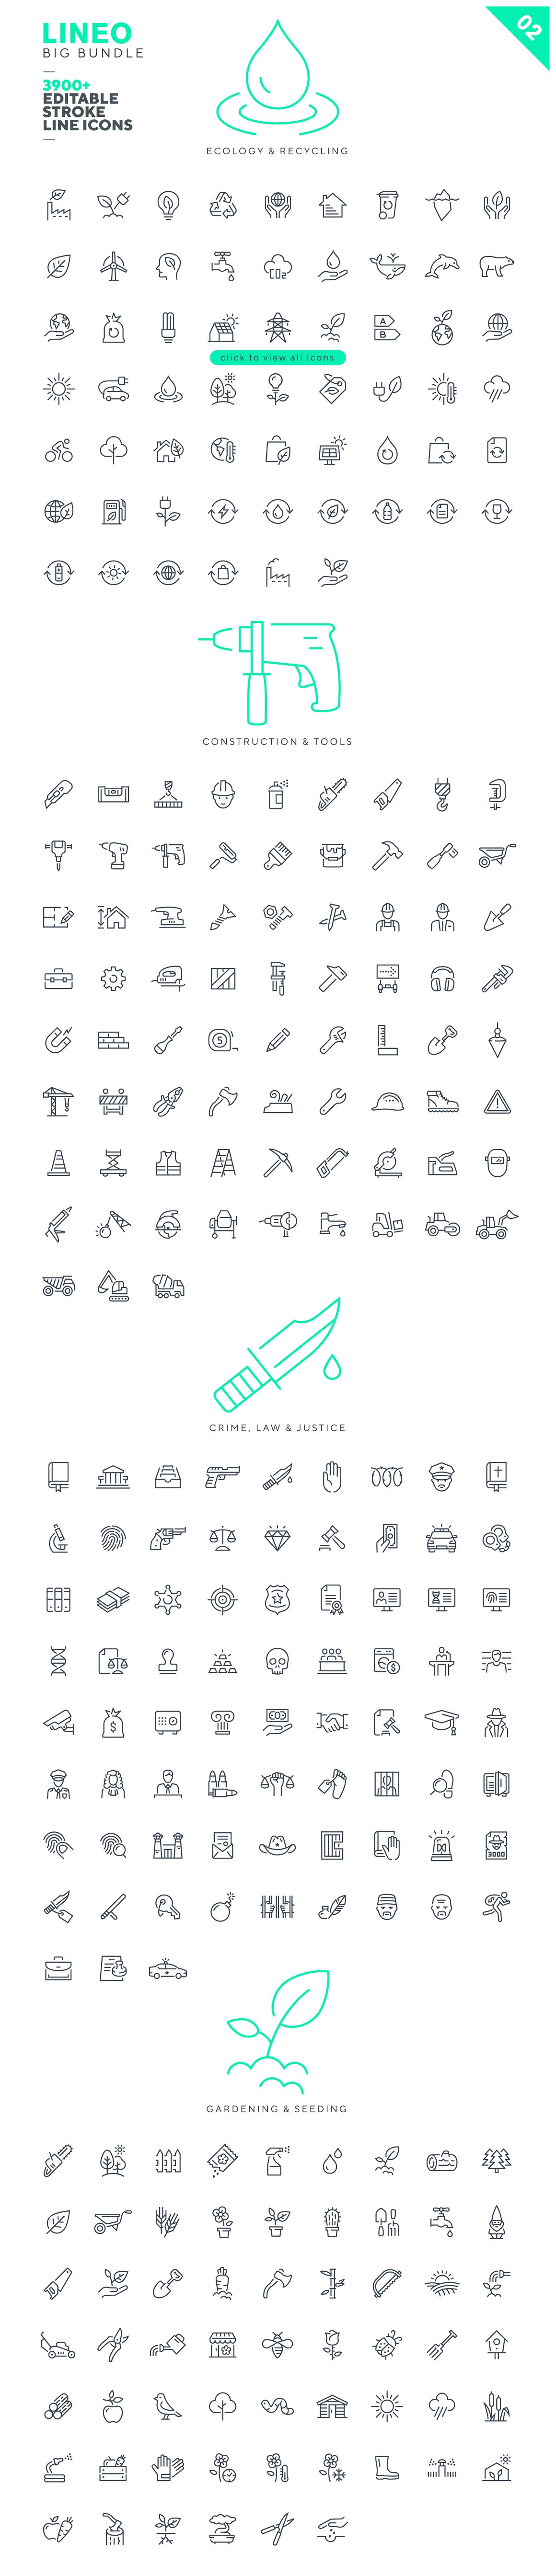 Ecology & recycling, construction & tools, crime, law & justice and gardening & seeding icons on a white background.